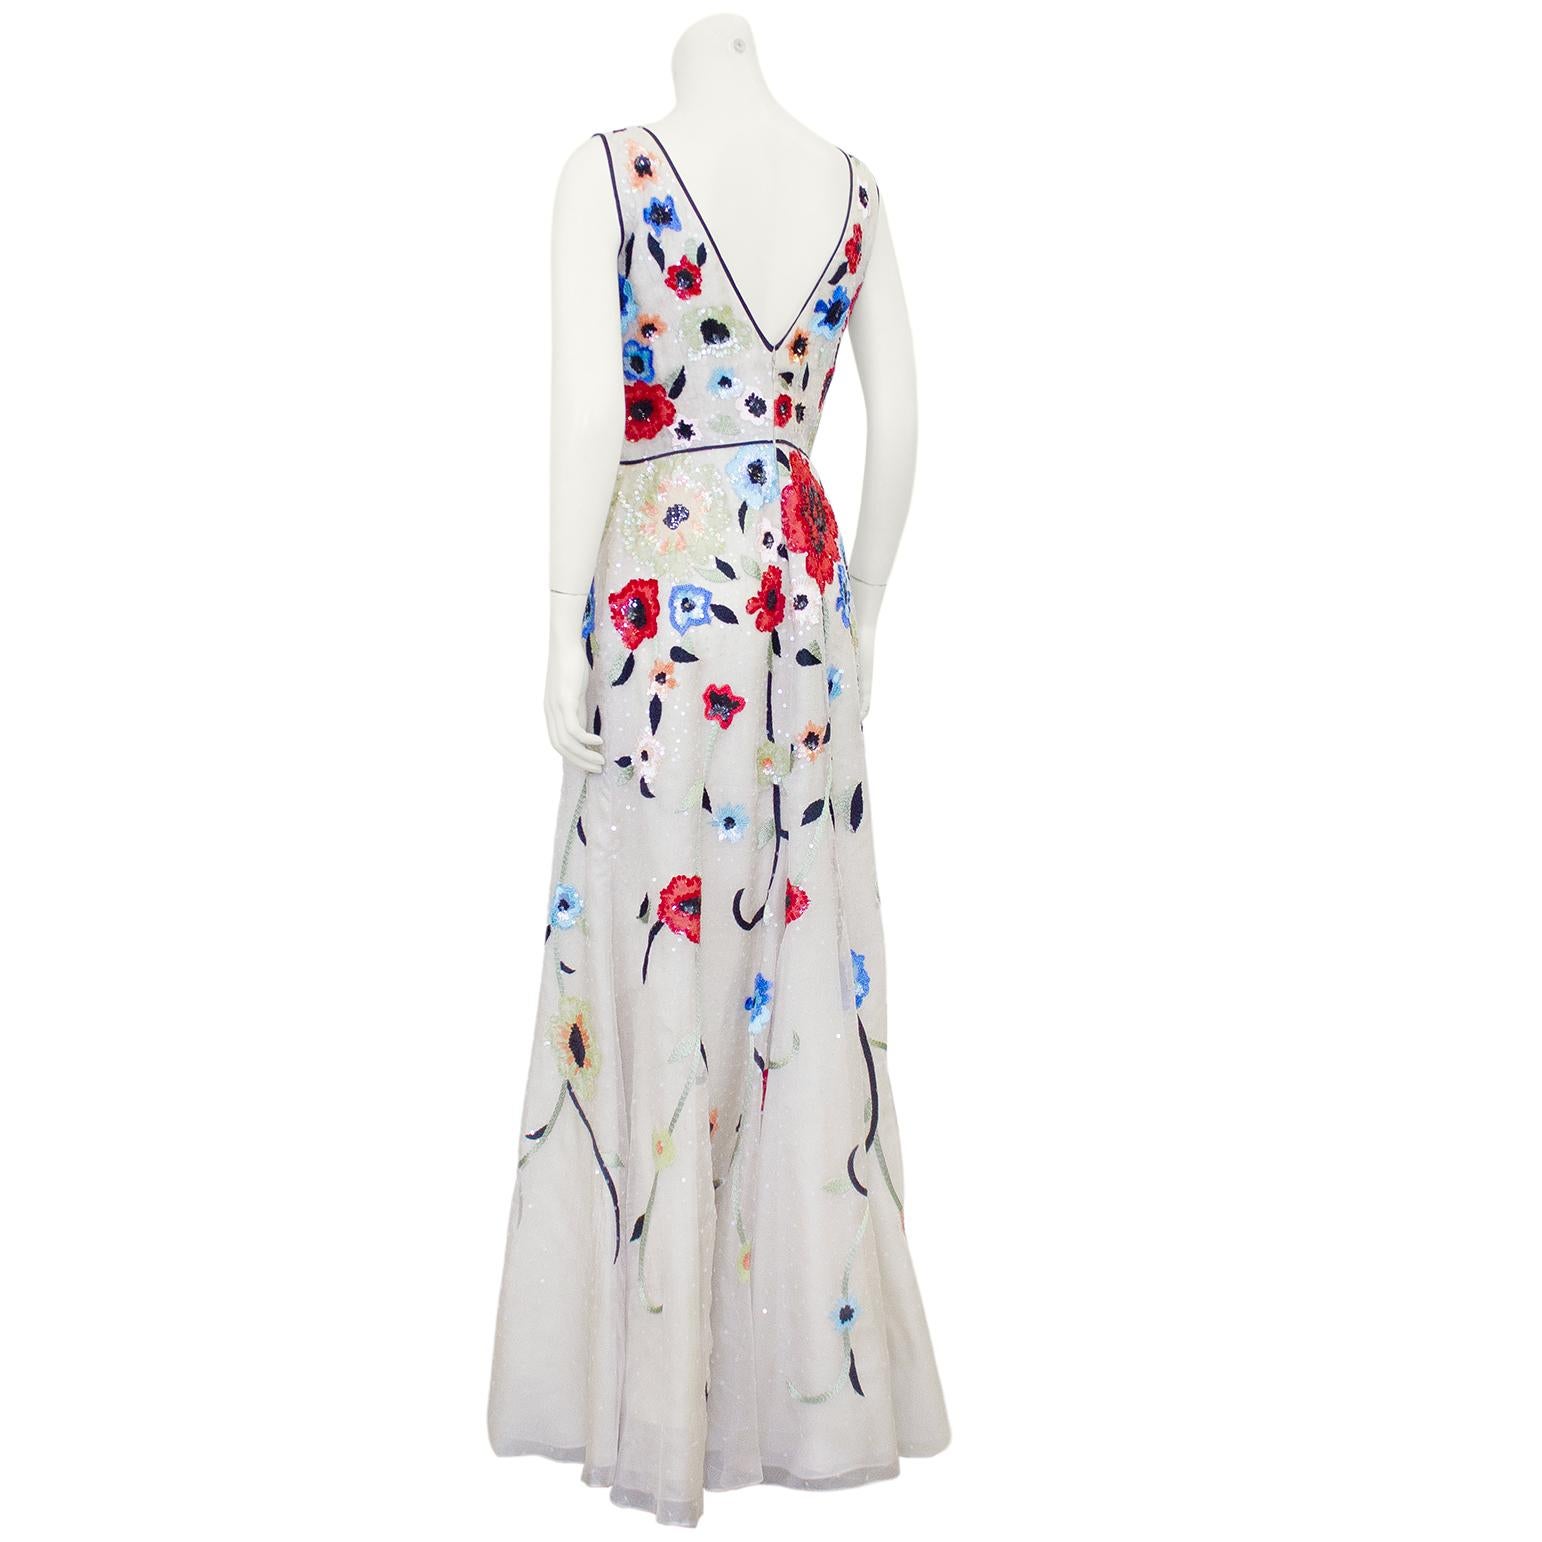 Late 2010s Dennis Basso Floral Beaded Gown In Good Condition For Sale In Toronto, Ontario